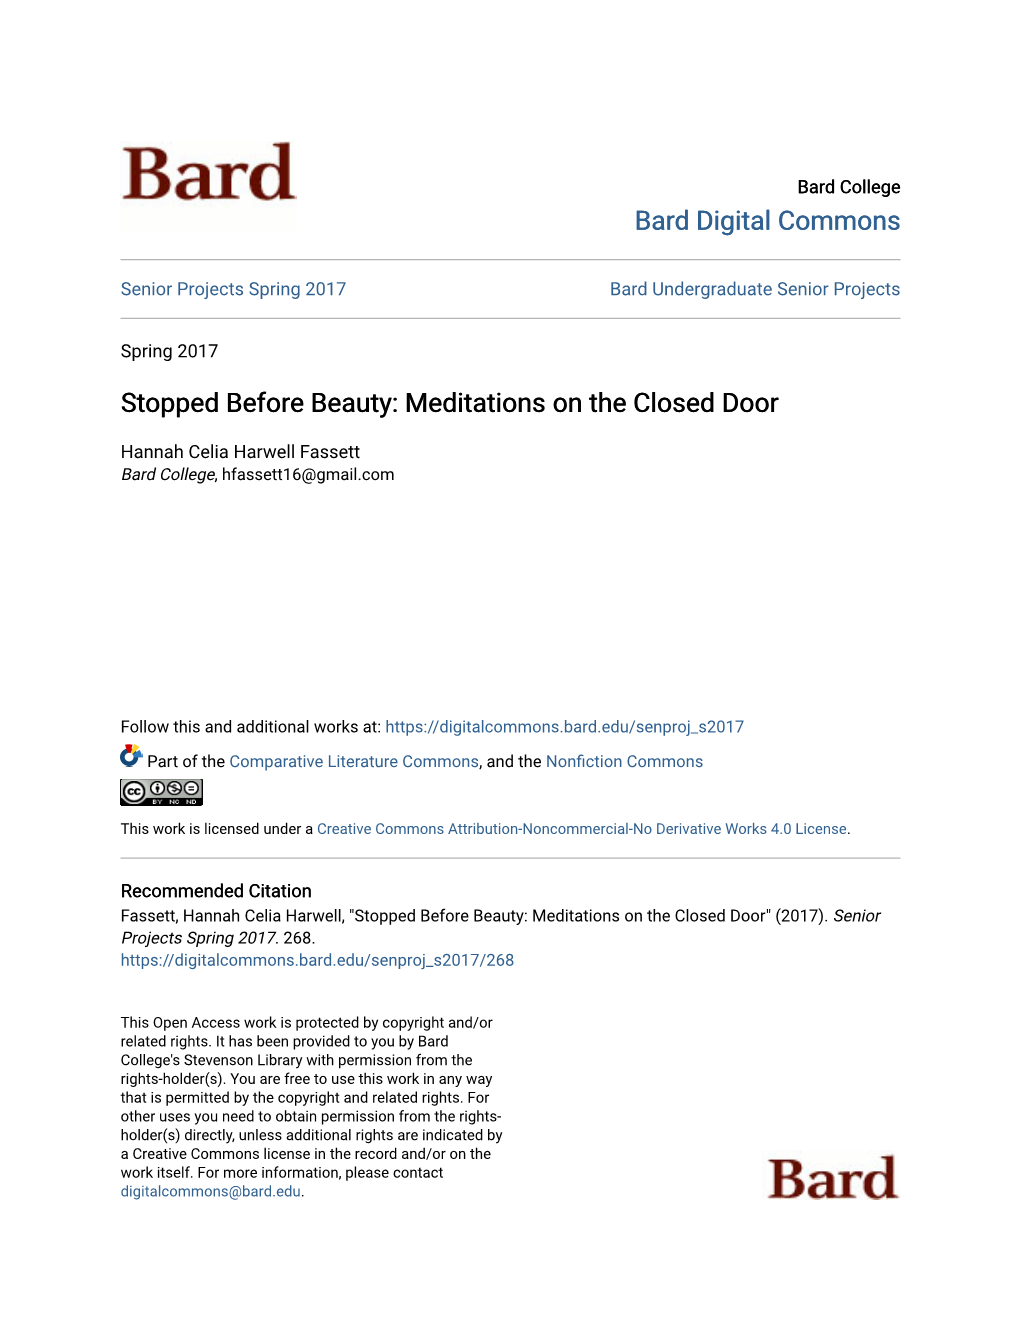 Stopped Before Beauty: Meditations on the Closed Door